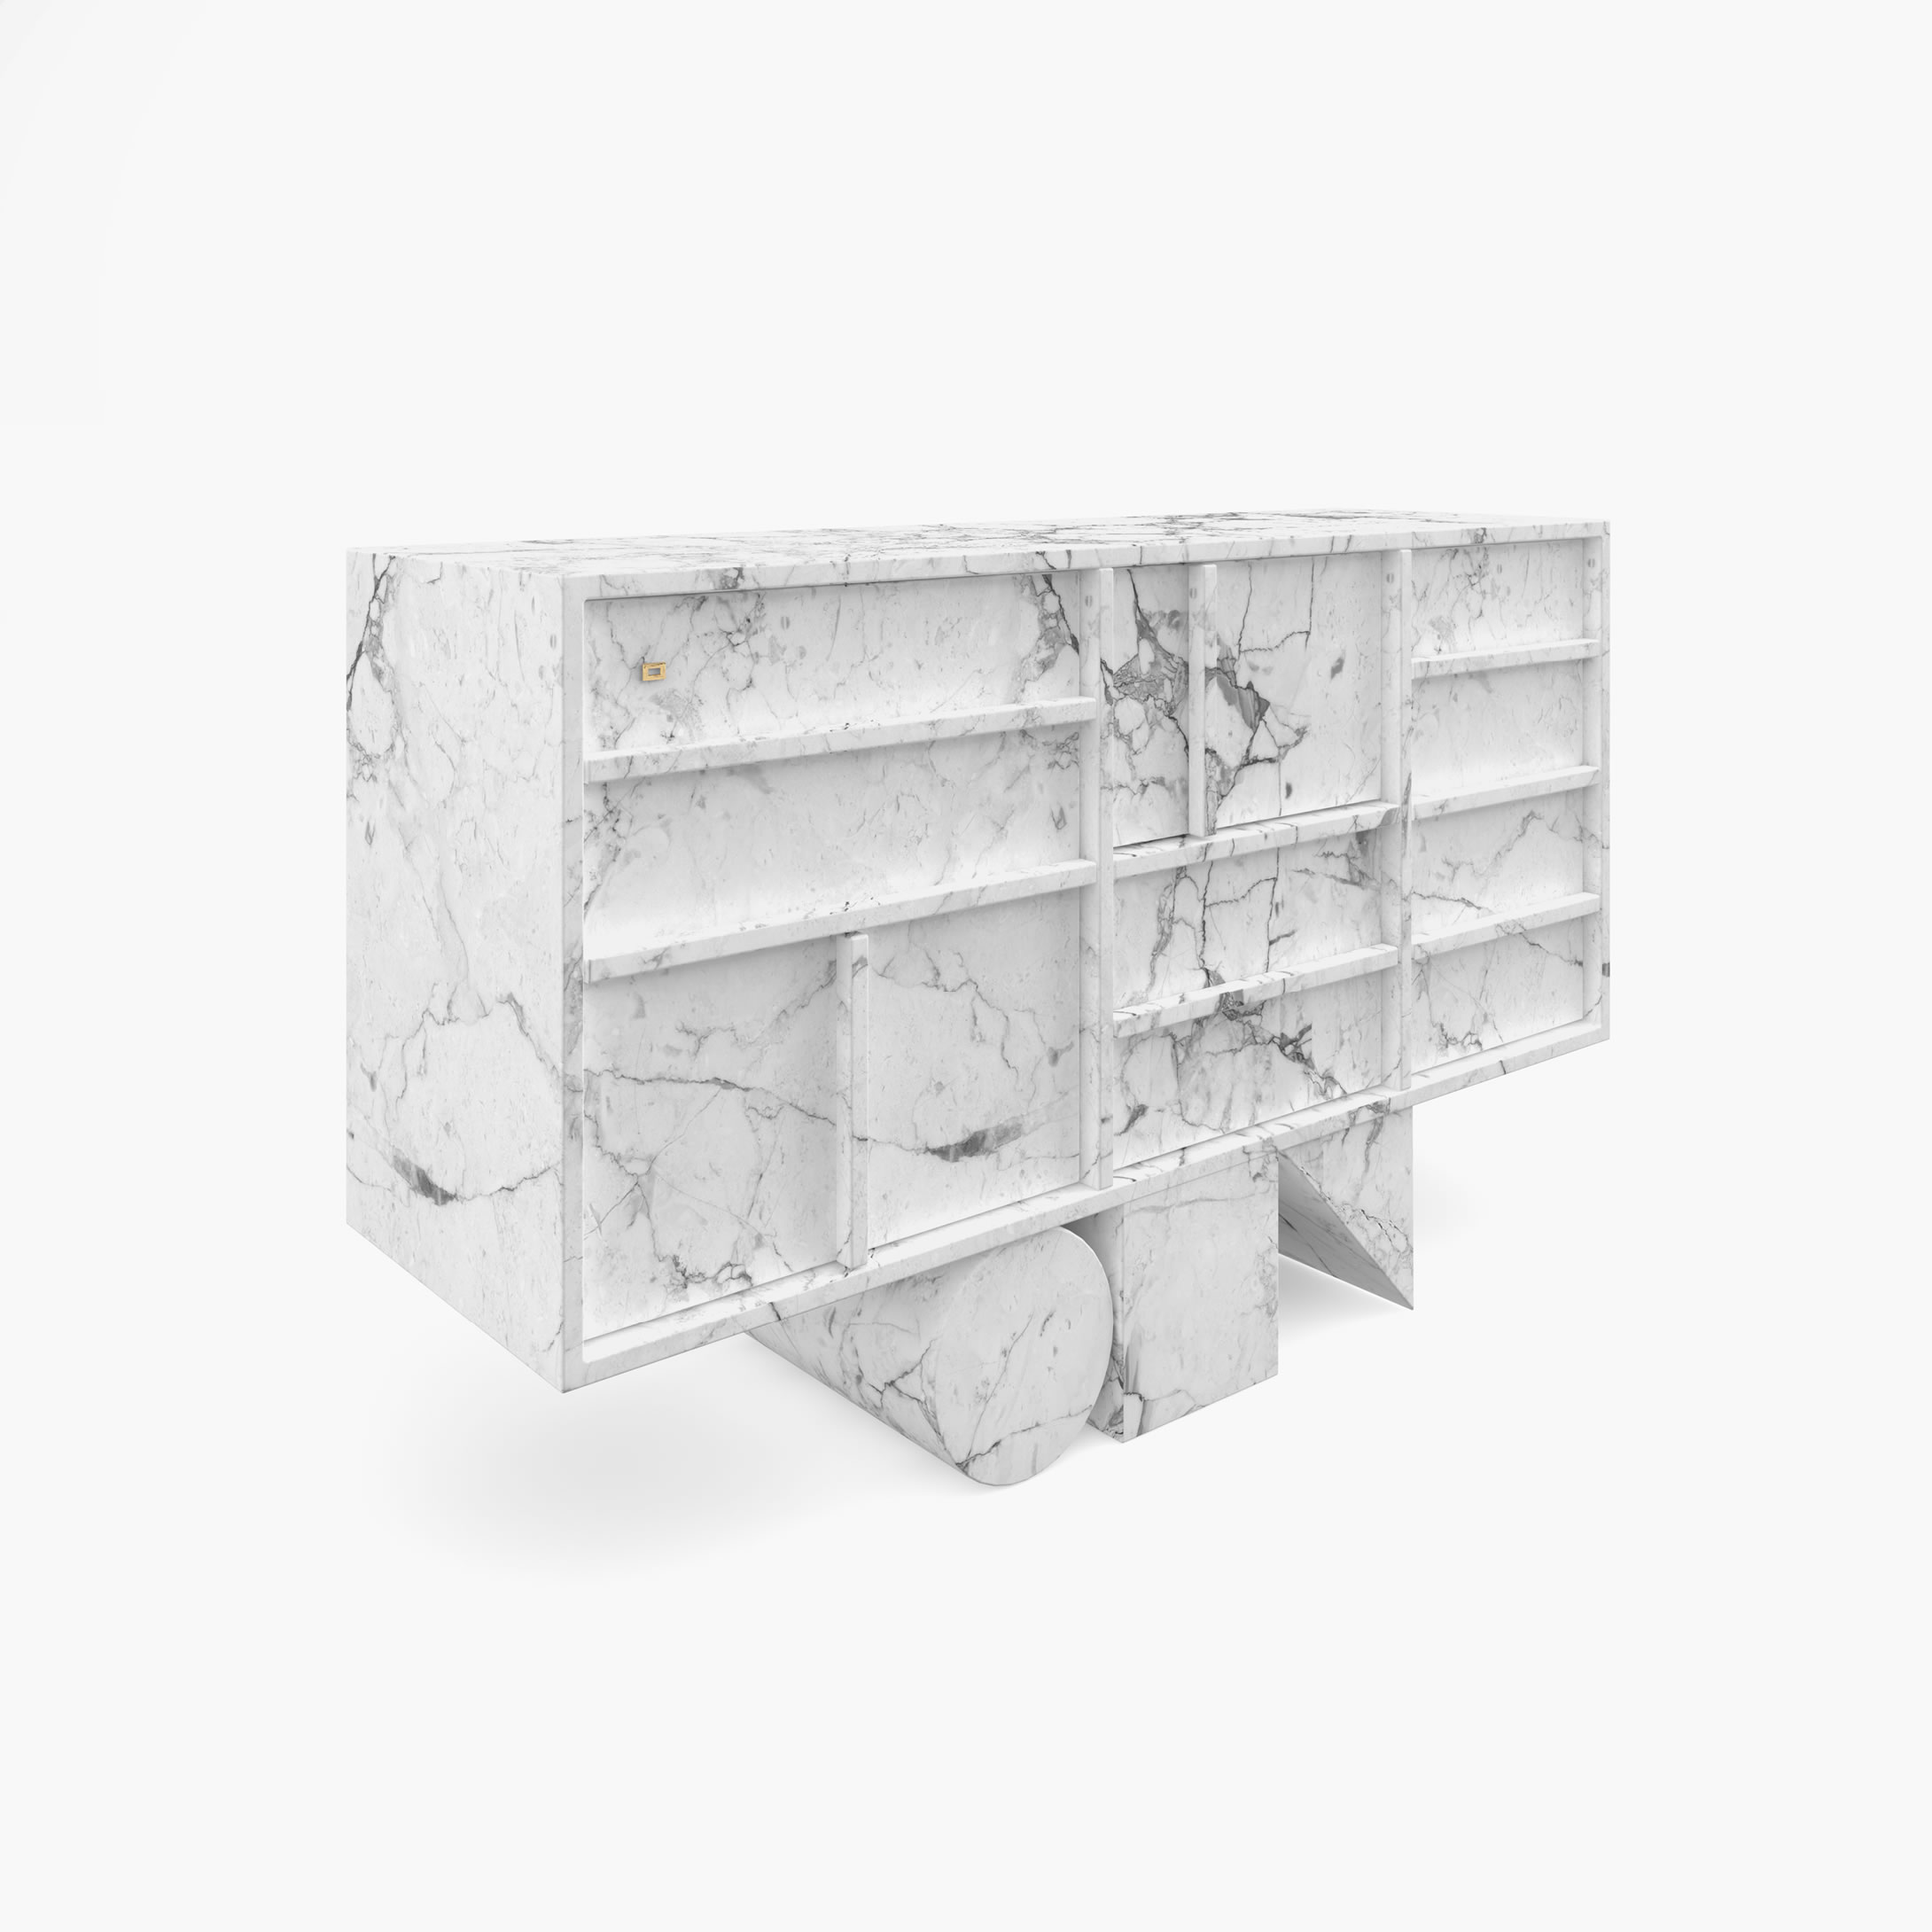 Sideboard Cylinder cuboid prism White Arabescato Marble contemporary Living Room design Consoles  Sideboards FS 13 FELIX SCHWAKE